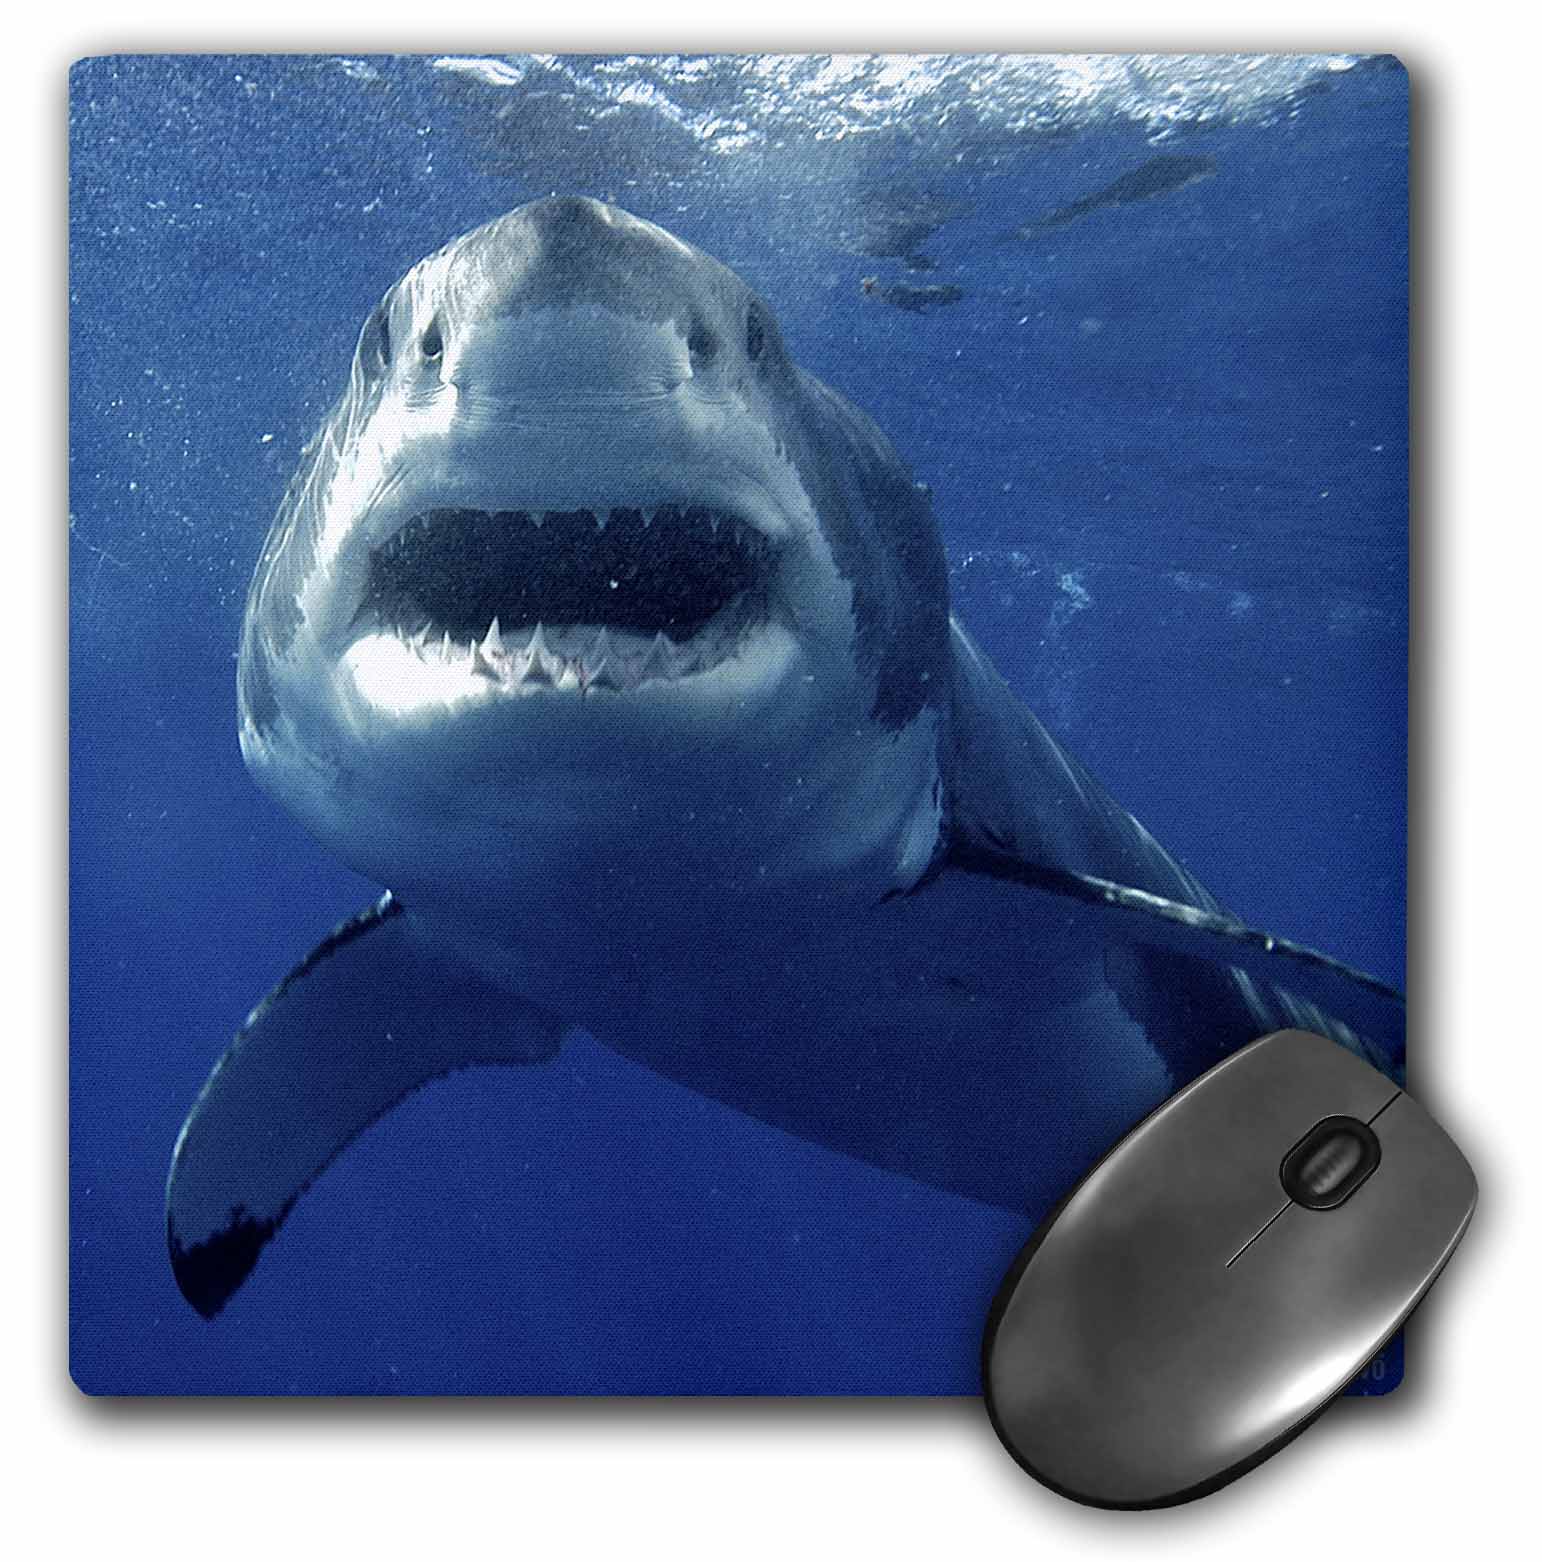 3dRose Great White Shark - Mouse Pad, 8 by 8-inch (mp_10584_1) - image 1 of 1